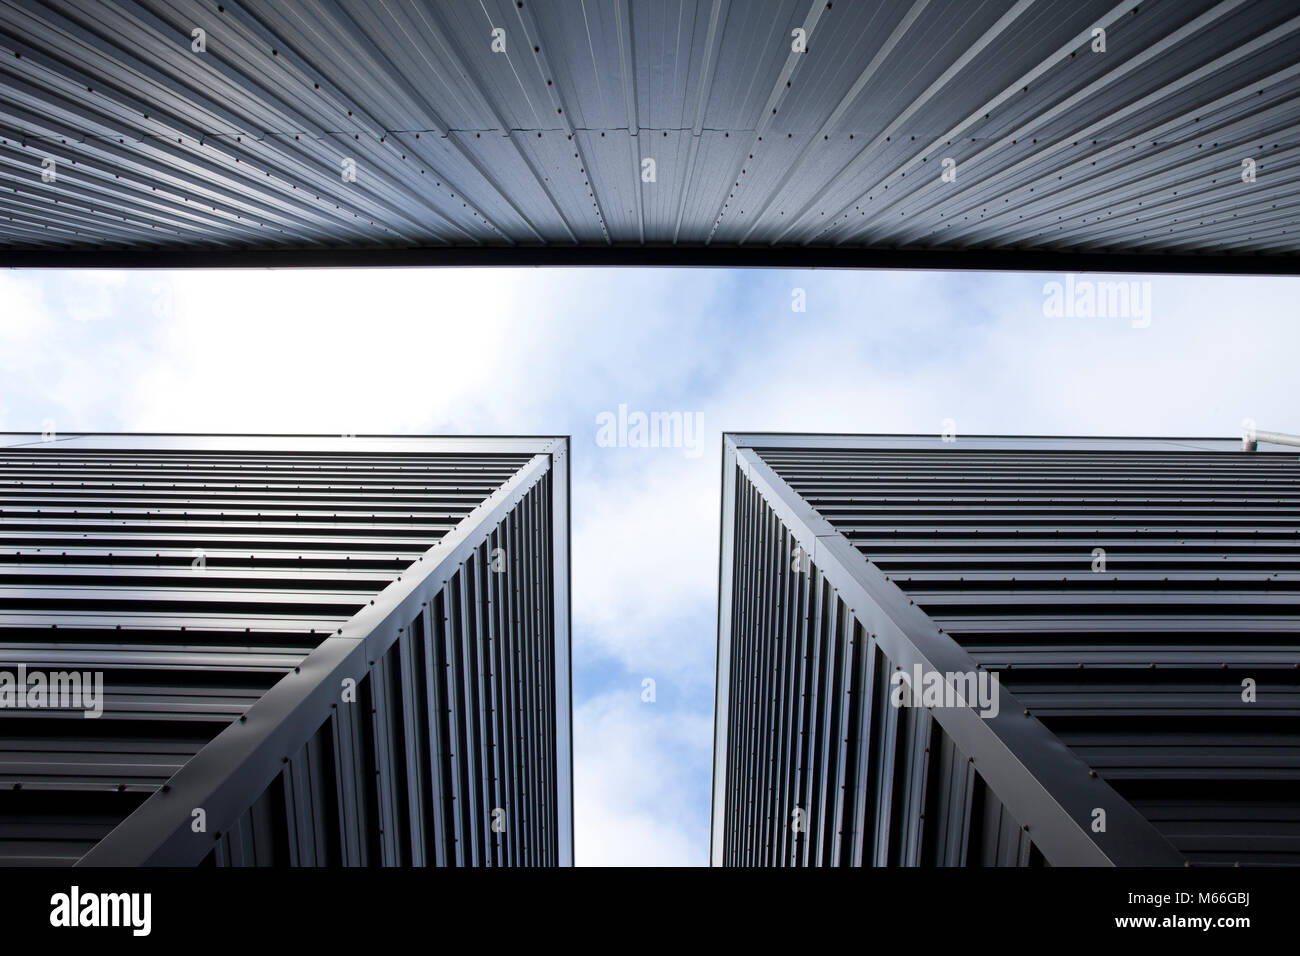 abstract view of steel cladding on modern warehousing locking up with sky with clouds an faint blue sky Stock Photo